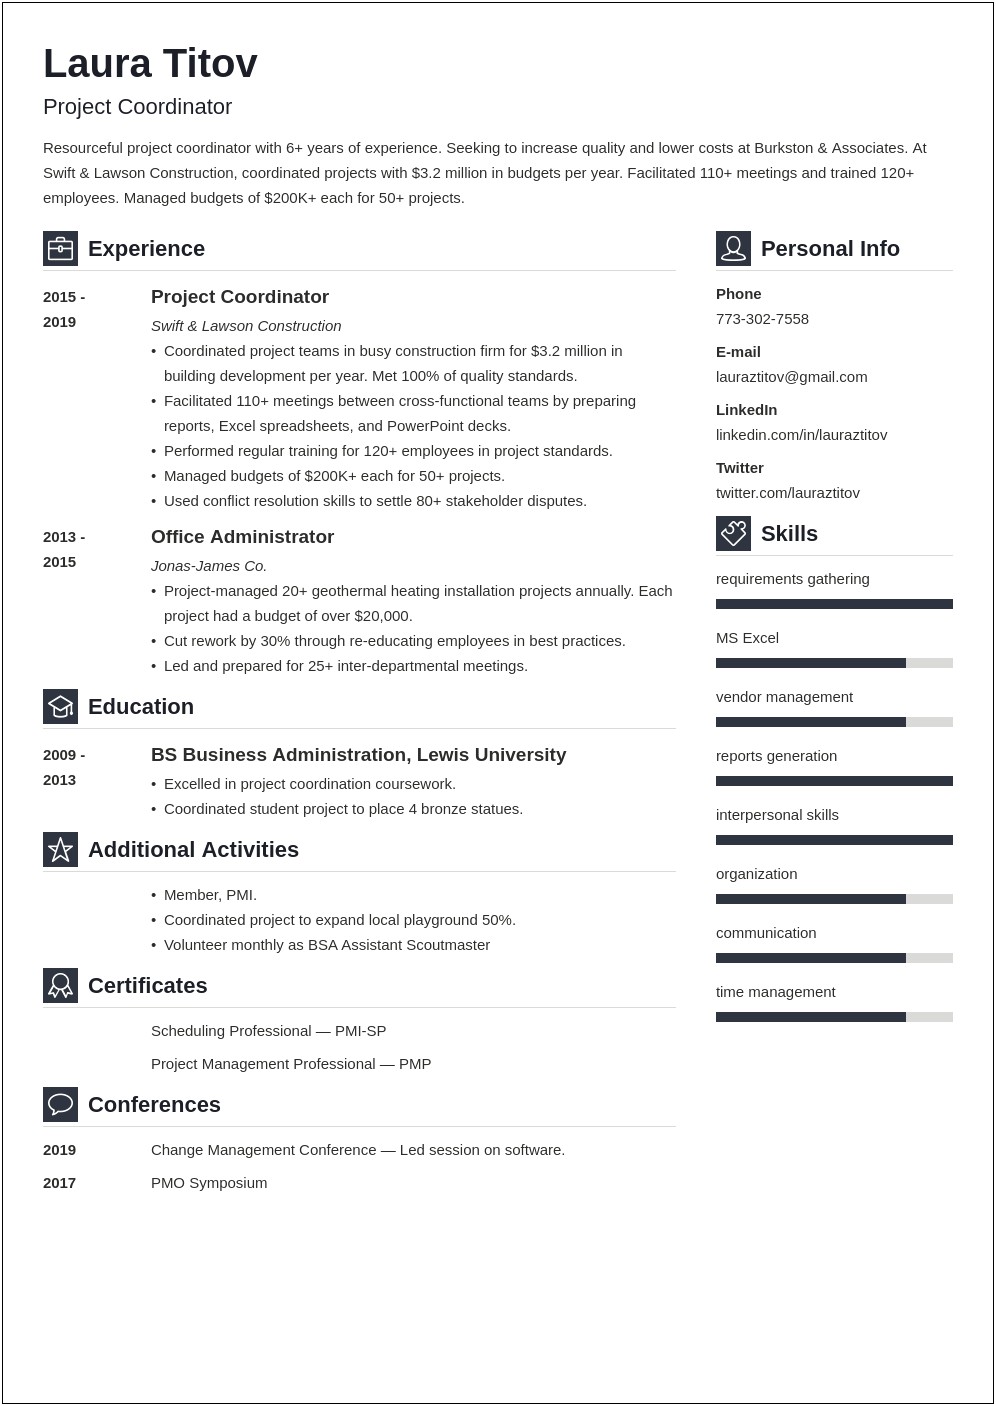 Project Coordination Time Management Resume Skills